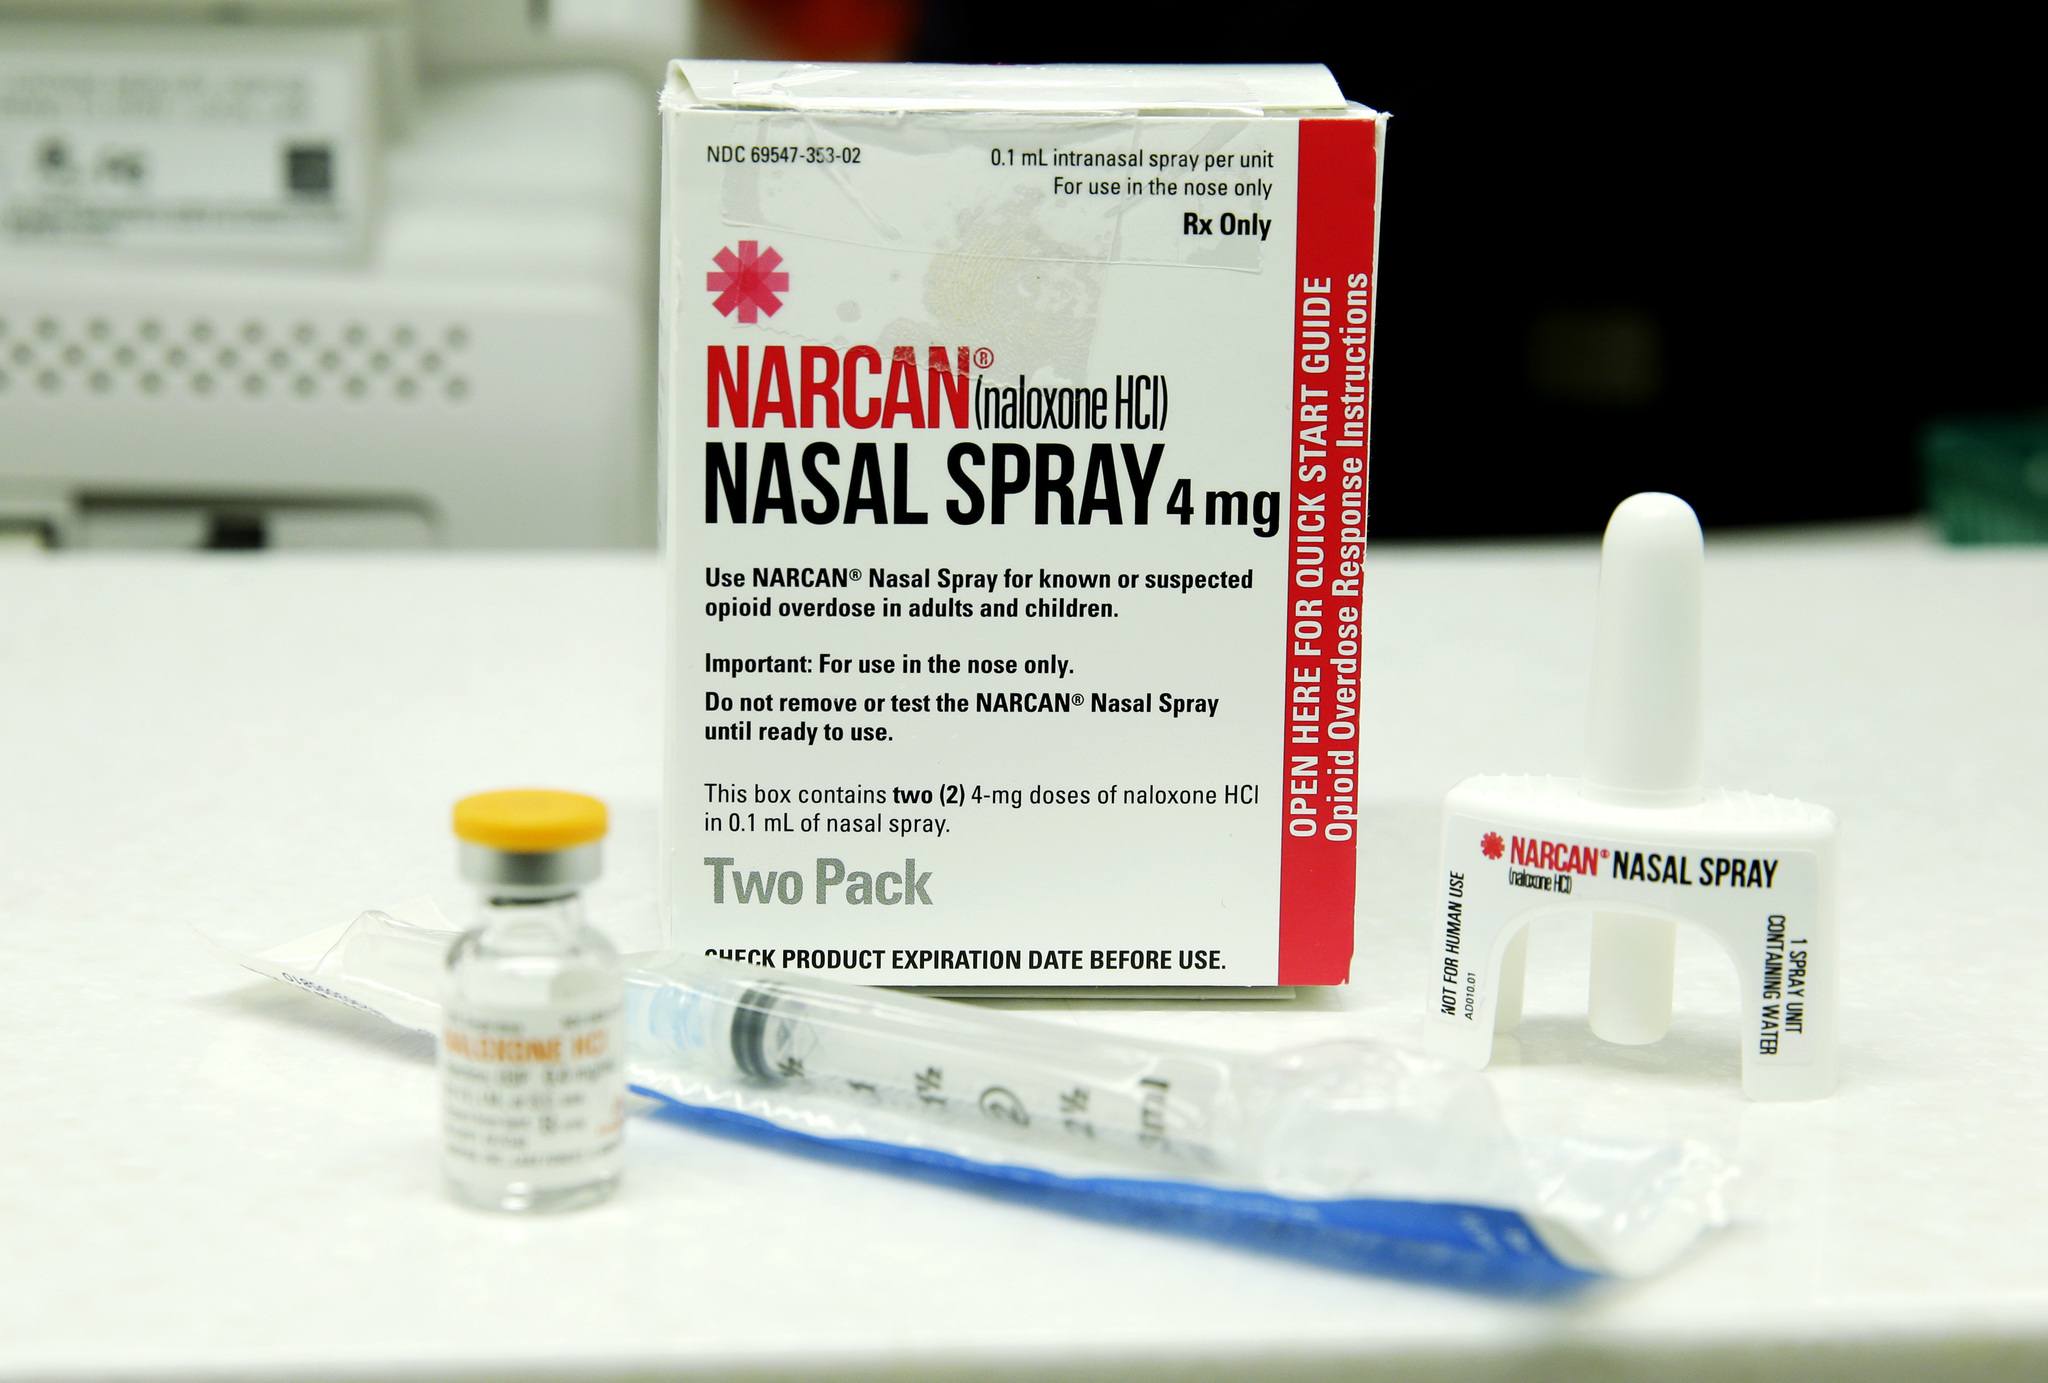 Injectable and nasal forms of Naloxone, which can be used to block the potentially fatal effects of an opioid overdose, are shown Friday at an outpatient pharmacy at the University of Washington. (Ted S. Warren/The Associated Press)